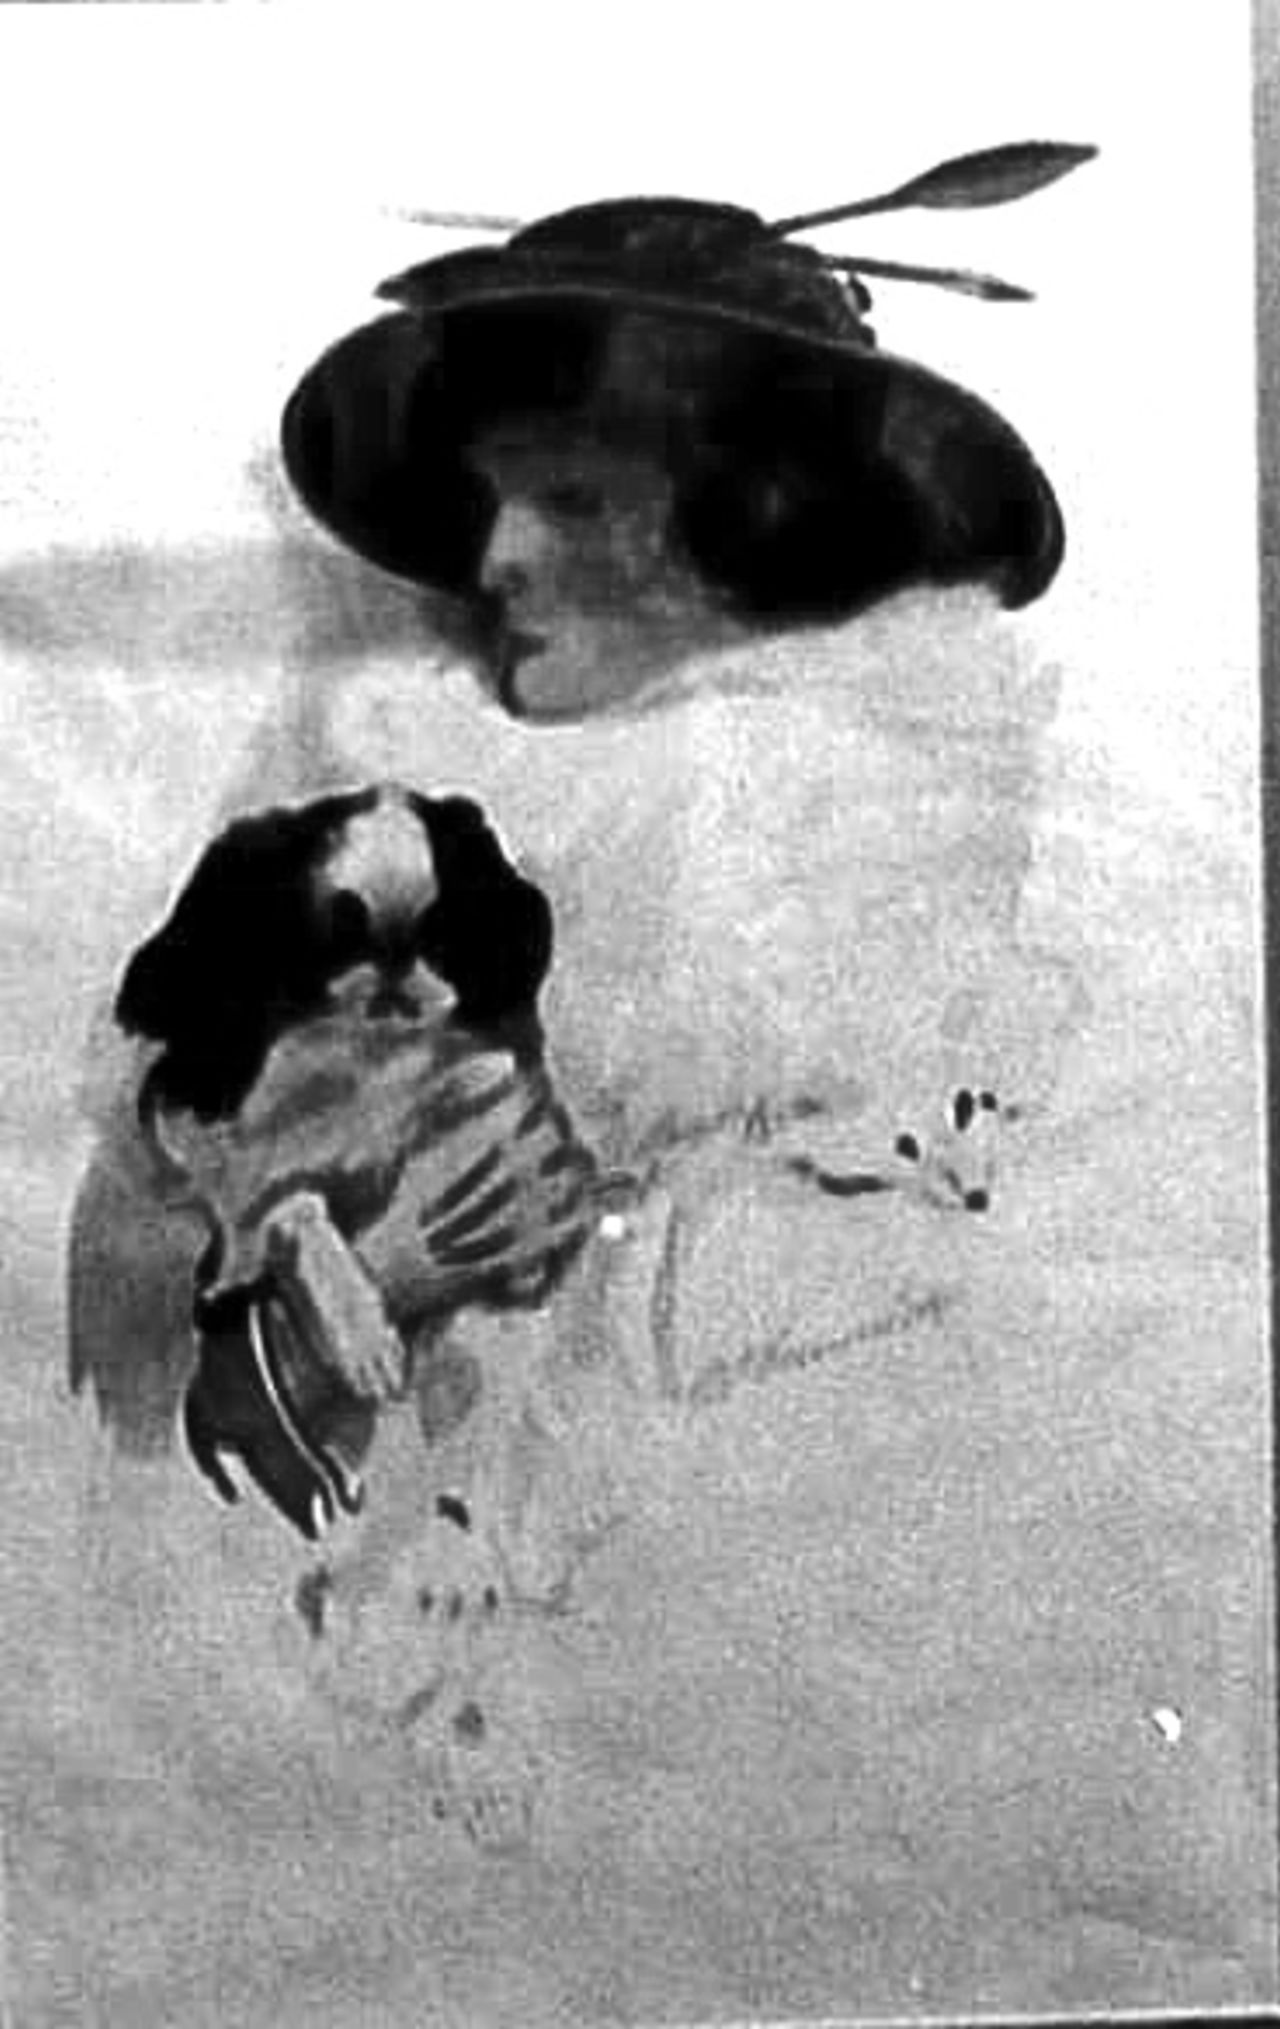 "Lady With Dog" by Clarrie Grimmett